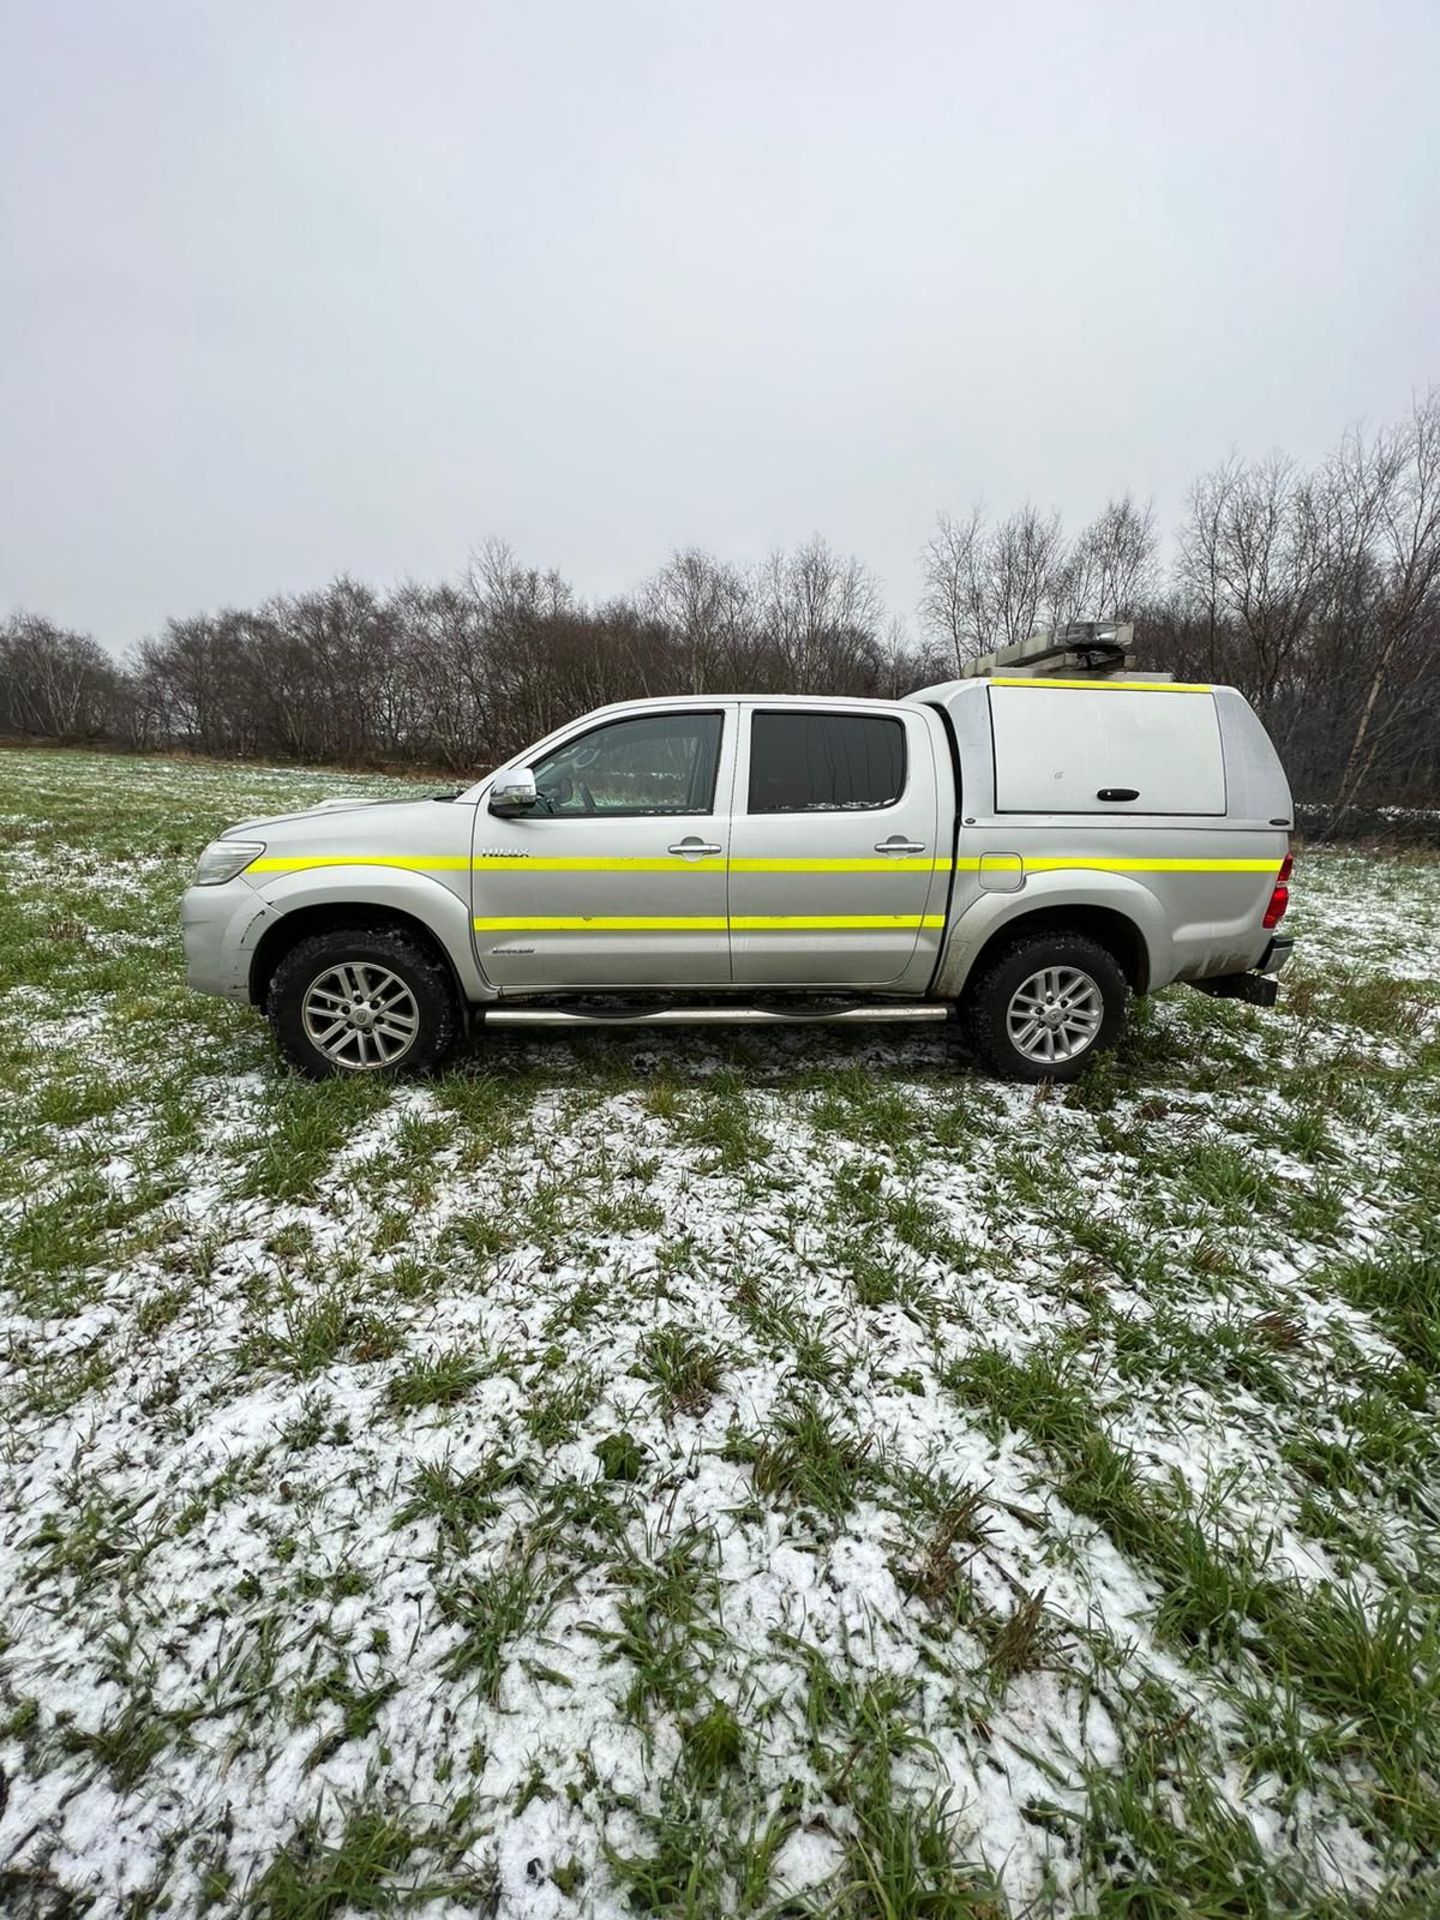 TOYOTA HILUX INVINCIBLE PICKUP TRUCK 4X4 - Image 2 of 15